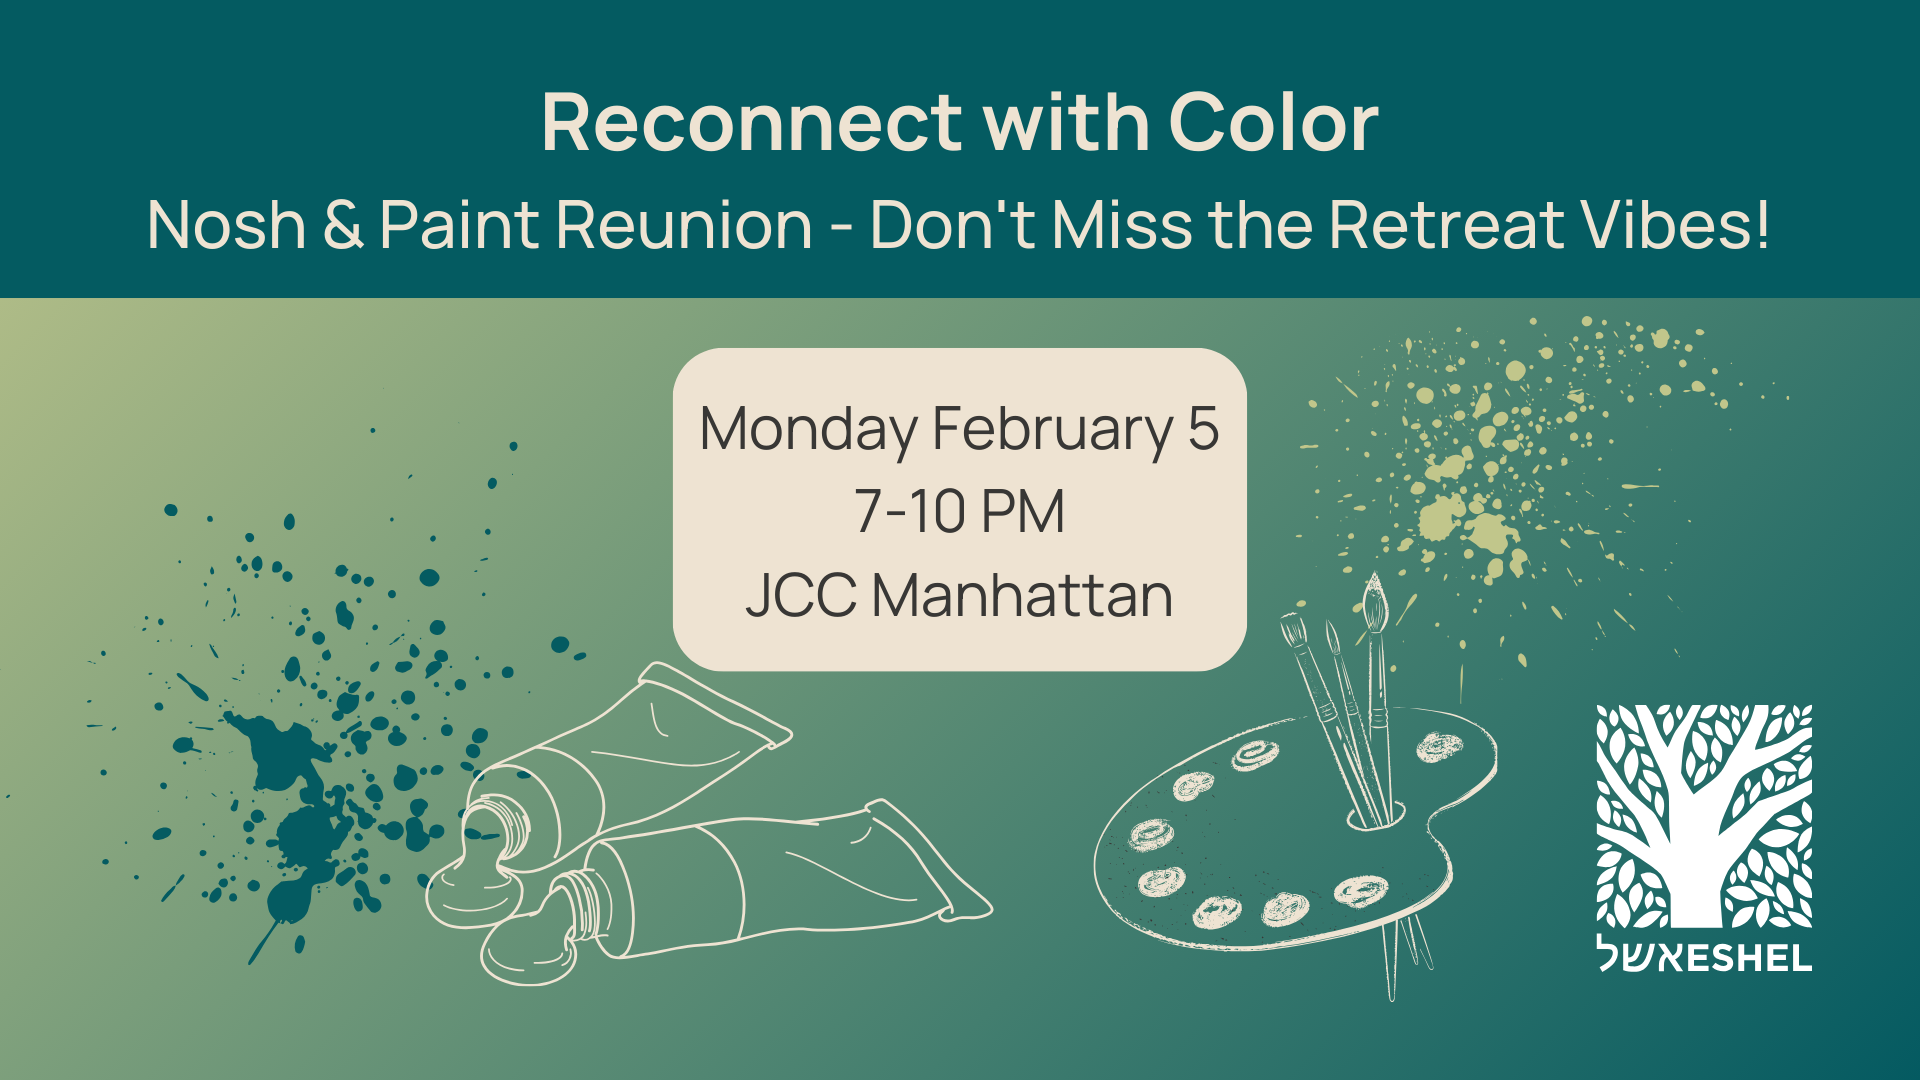 Reconnect with Color Paint and Sip Reunion Don't Miss the Retreat Vibes! Monday, February 5 @ 7-10 pm, JCC Manhattan